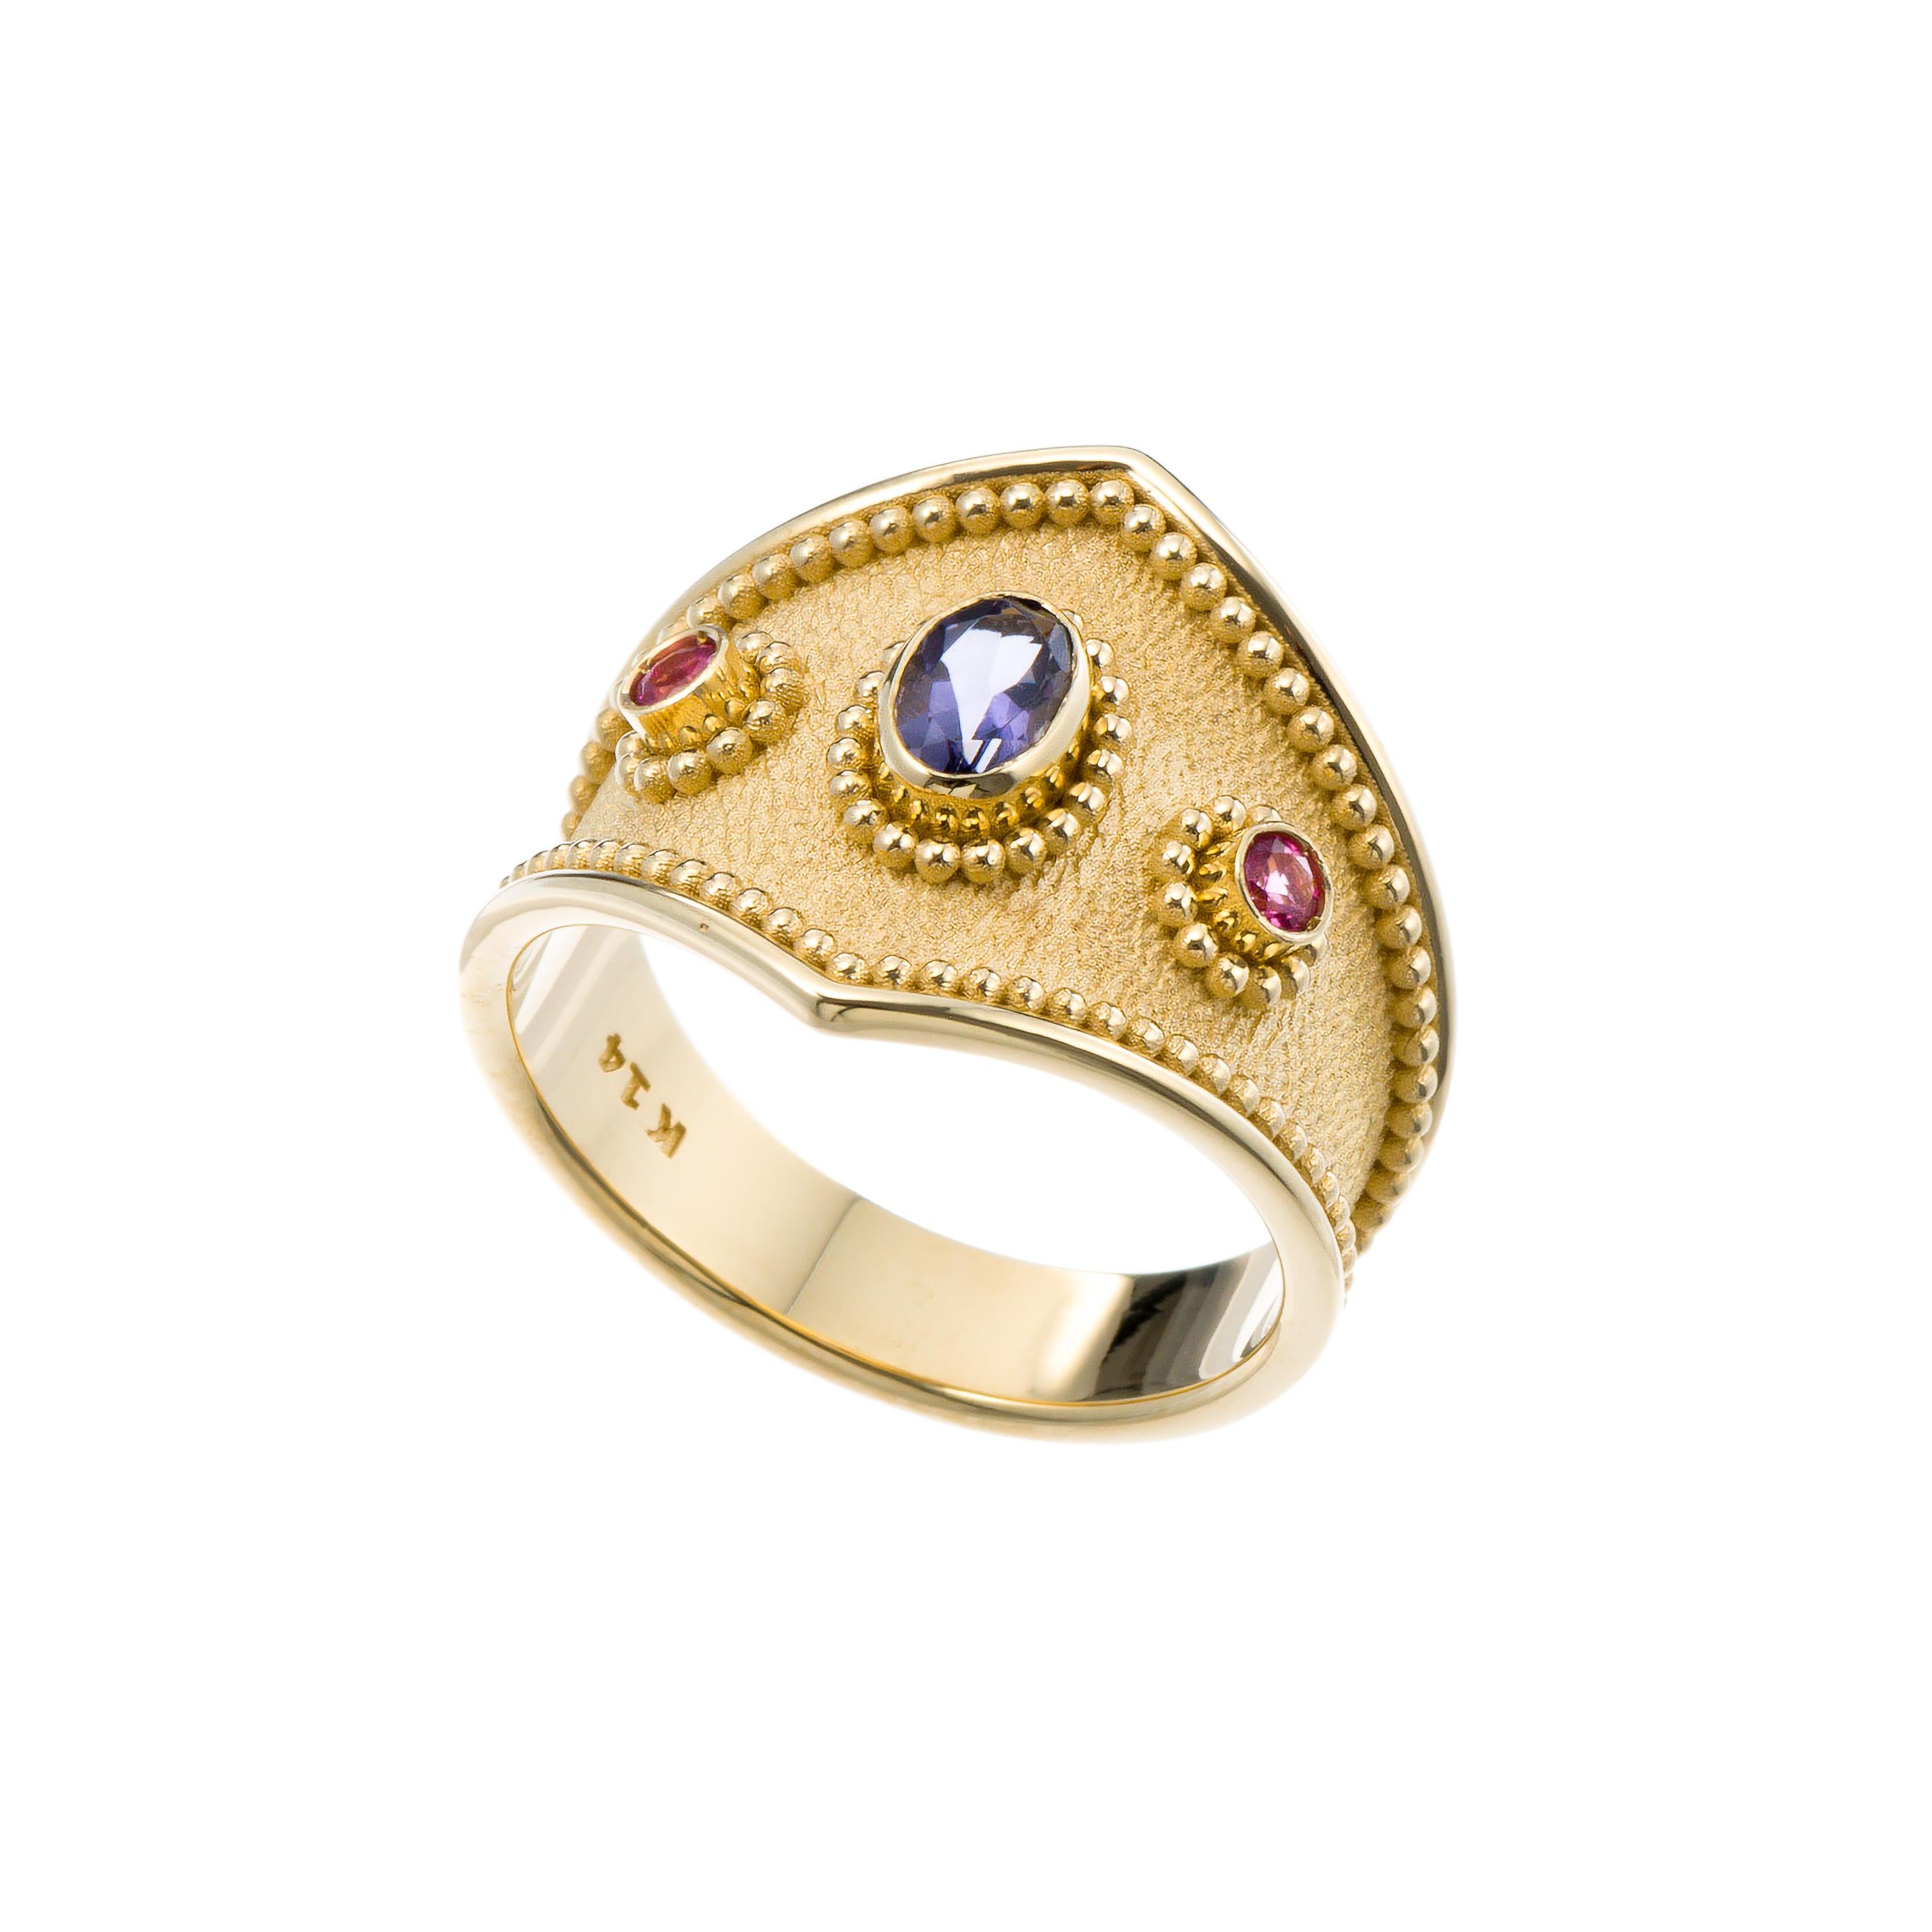 Byzantine Gold Ring with Tourmalines and Iolite For Sale 2